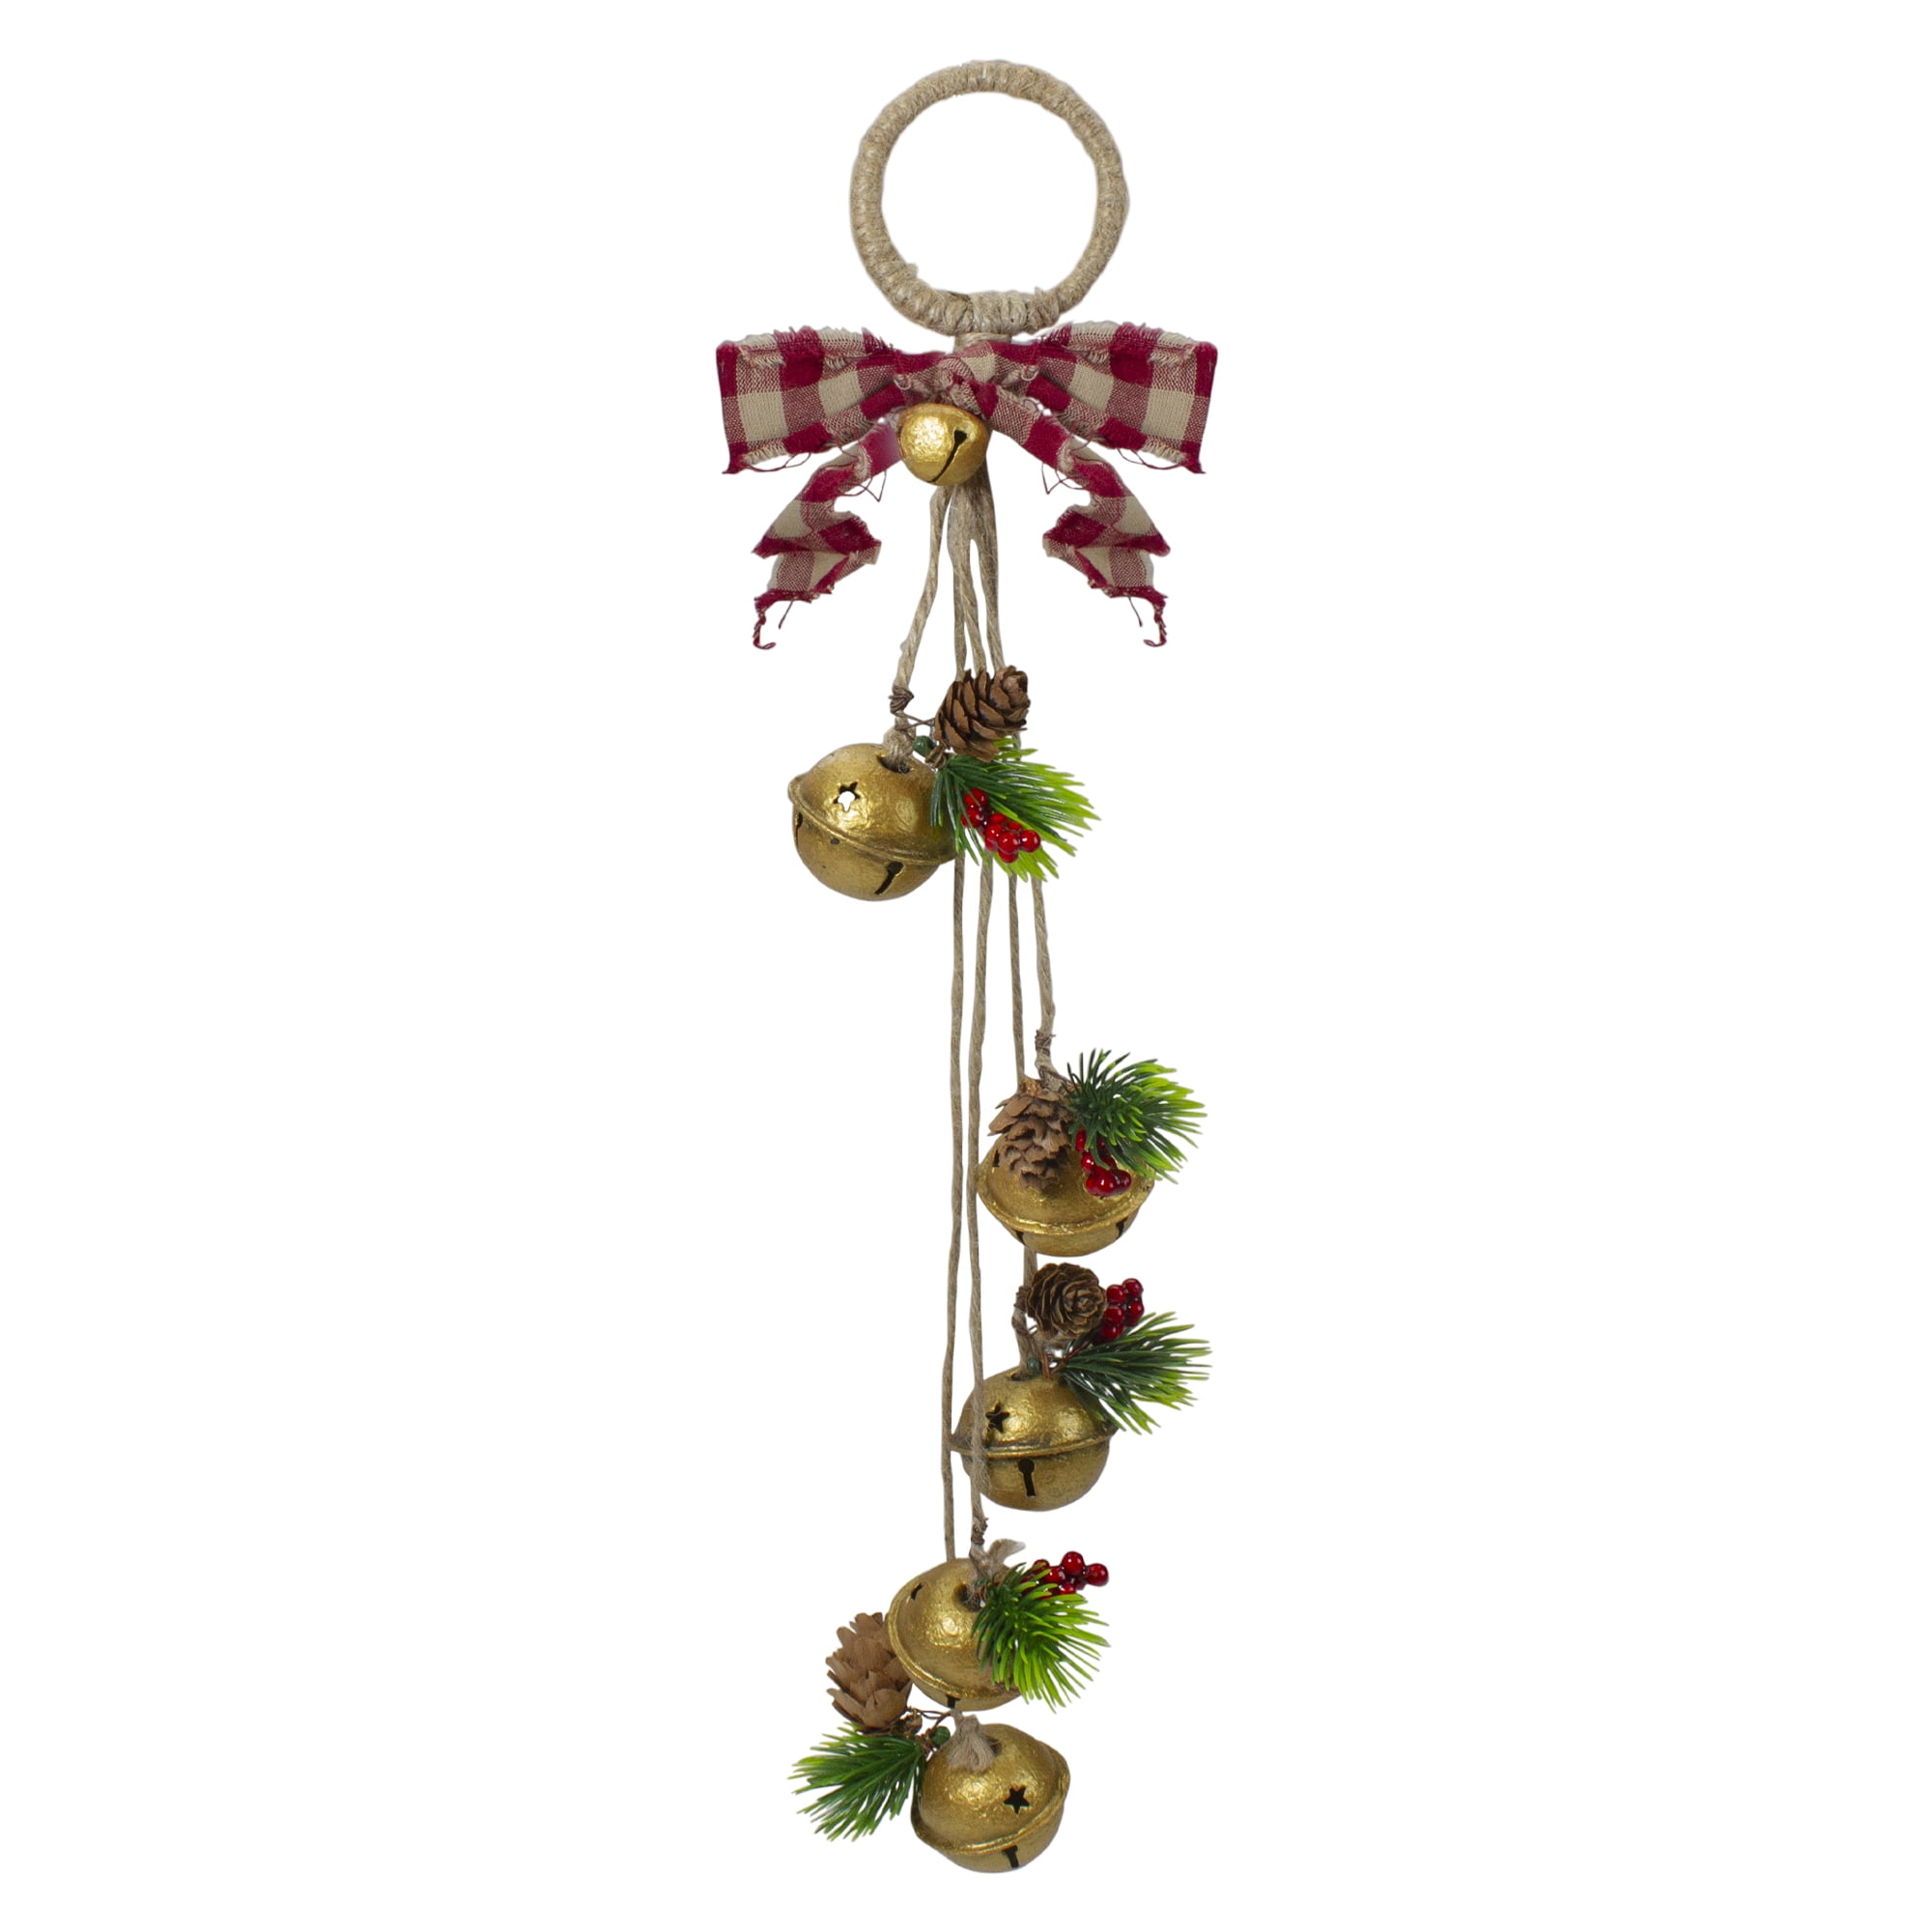 13" Rustic Bow Red Bells Christmas Door Hanger Jingle Chime Decoration New! 